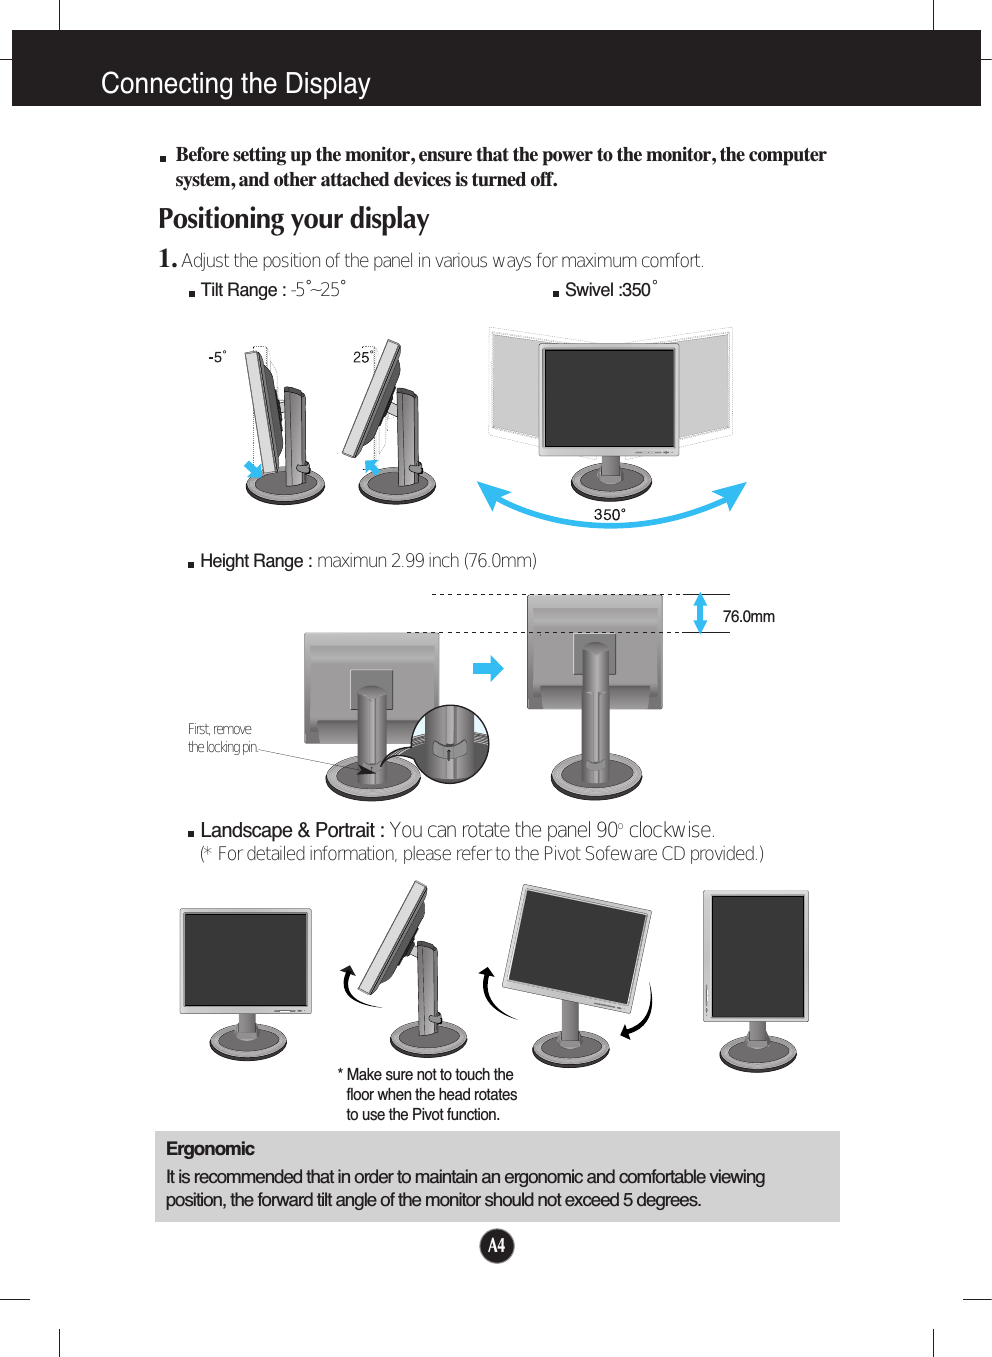 A4Connecting the DisplayBefore setting up the monitor, ensure that the power to the monitor, the computersystem, and other attached devices is turned off. Positioning your display1. Adjust the position of the panel in various ways for maximum comfort.Tilt Range : -5˚~25˚                             Swivel :350˚ErgonomicIt is recommended that in order to maintain an ergonomic and comfortable viewingposition, the forward tilt angle of the monitor should not exceed 5 degrees.Height Range : maximun 2.99 inch (76.0mm)76.0mmFirst, remove the locking pin.Landscape &amp; Portrait : You can rotate the panel 90o  clockwise. (* For detailed information, please refer to the Pivot Sofeware CD provided.)* Make sure not to touch thefloor when the head rotatesto use the Pivot function.